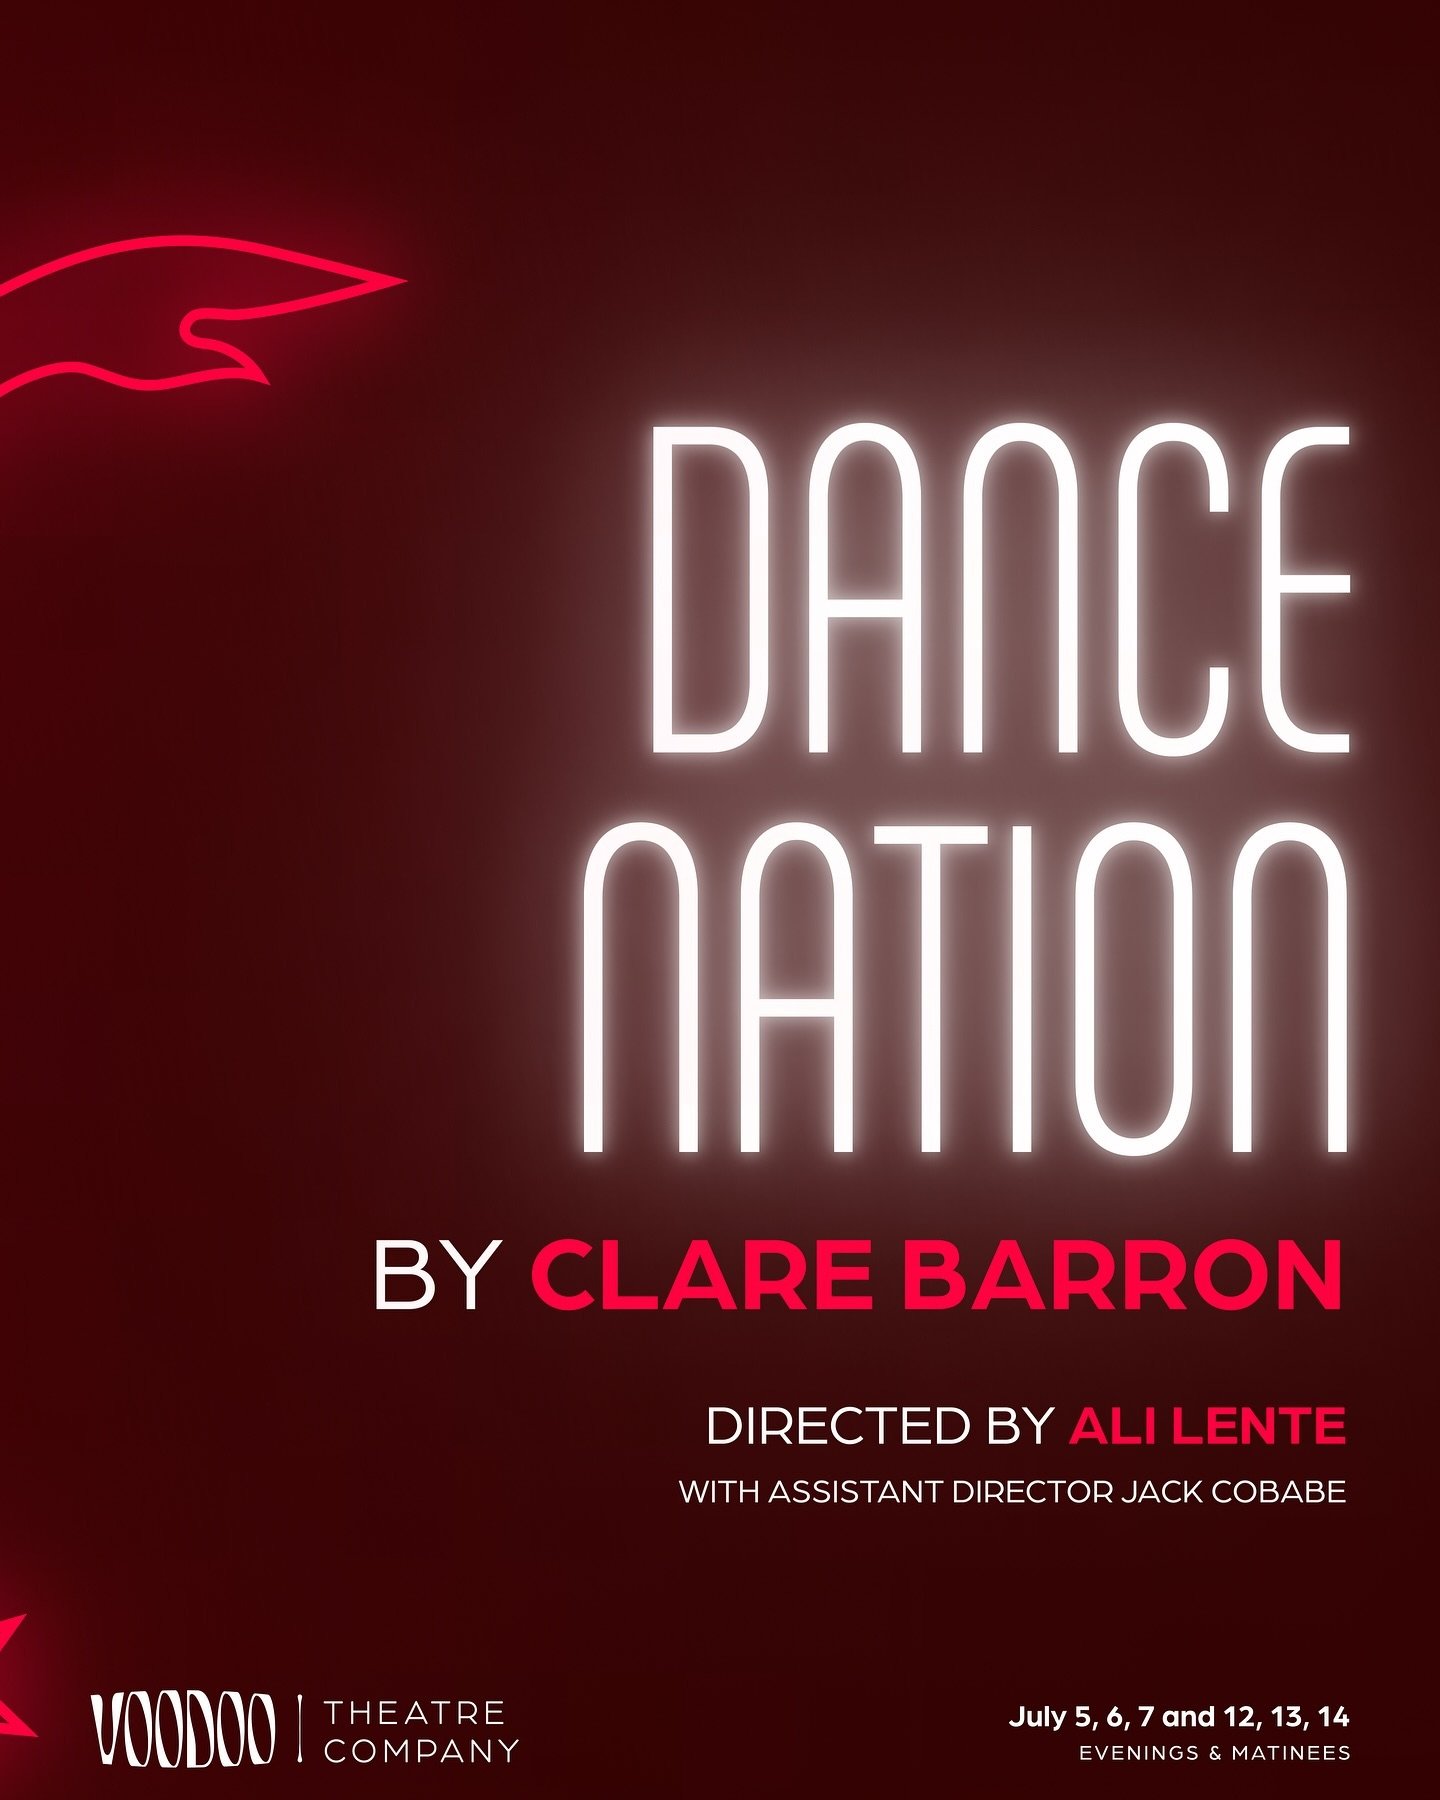 Dance Nation by Clare Barron is play about ambition, growing up, and how to find our souls in the heat of it all.

Somewhere in America, an army of pre-teen competitive dancers plots to take over the world. And if their new routine is good enough, th